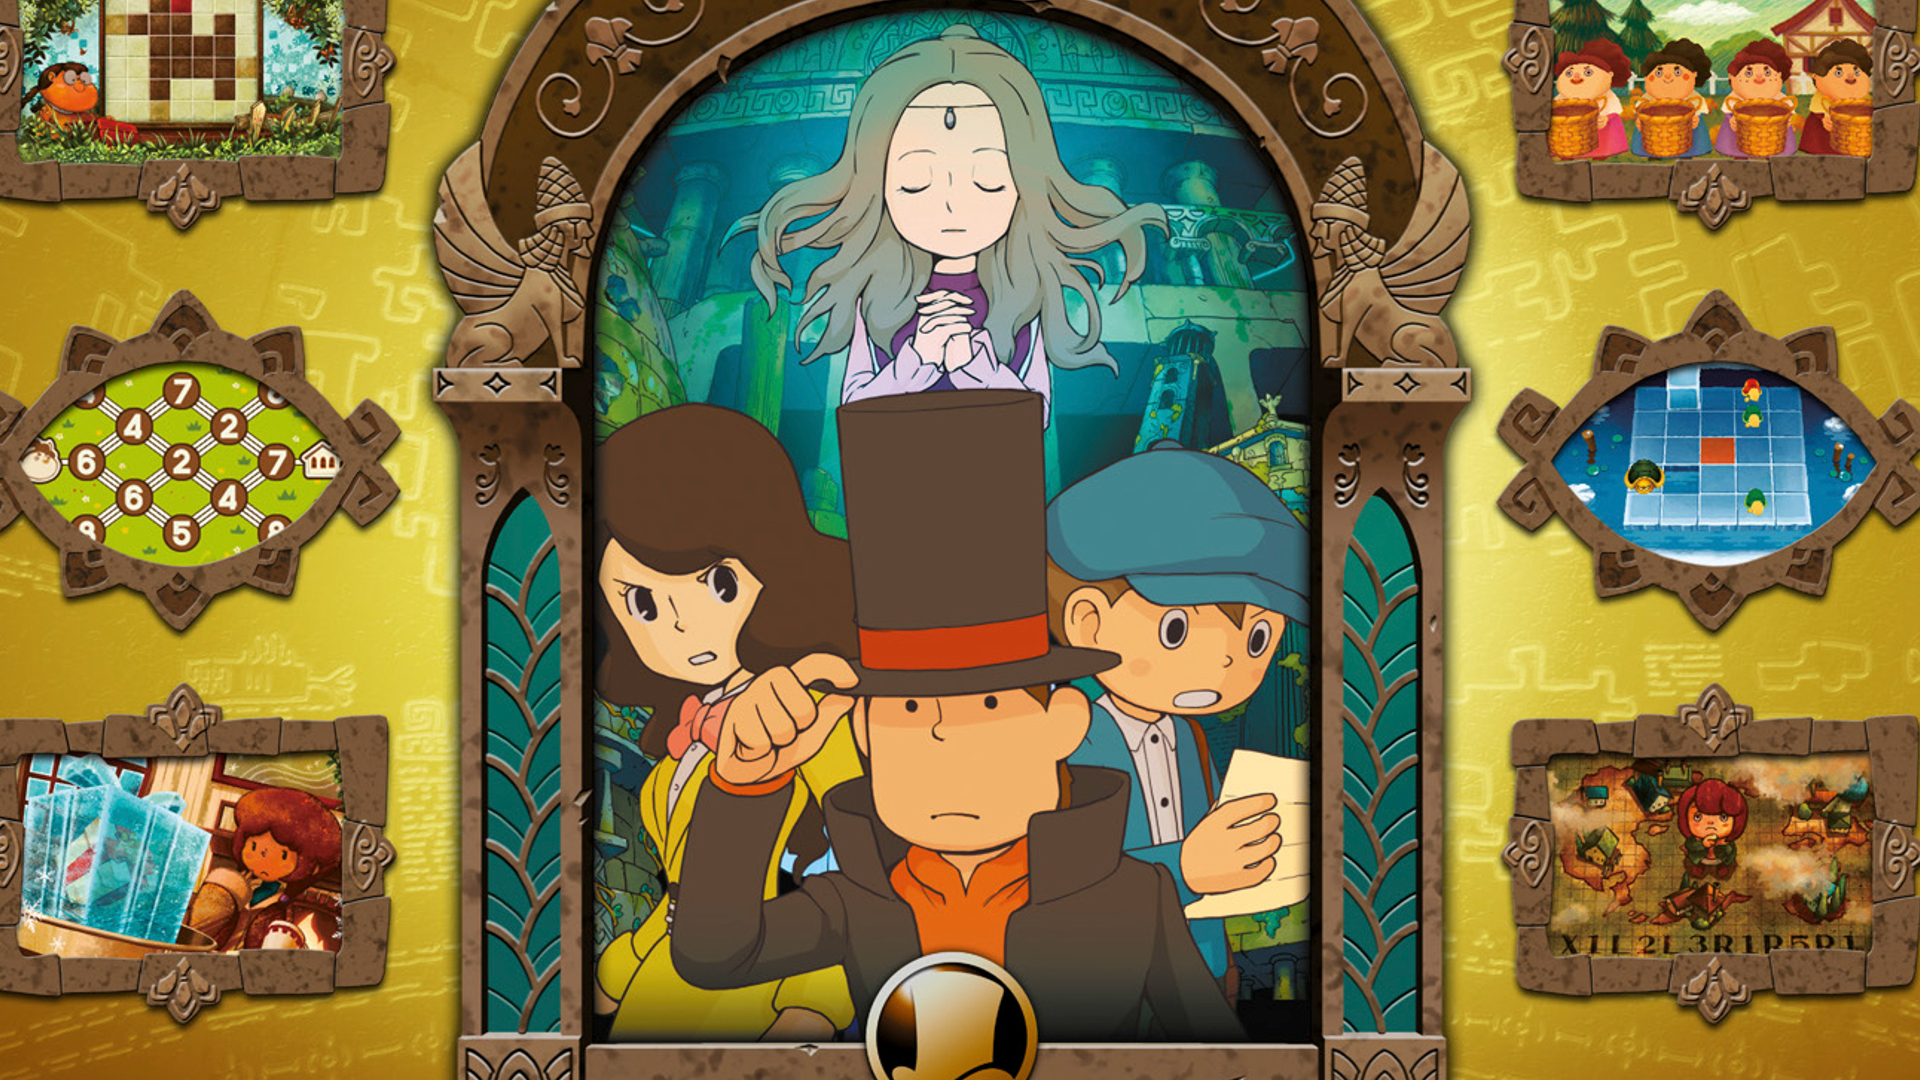 Best 3DS Games - Professor Layton and the Azran Legacy